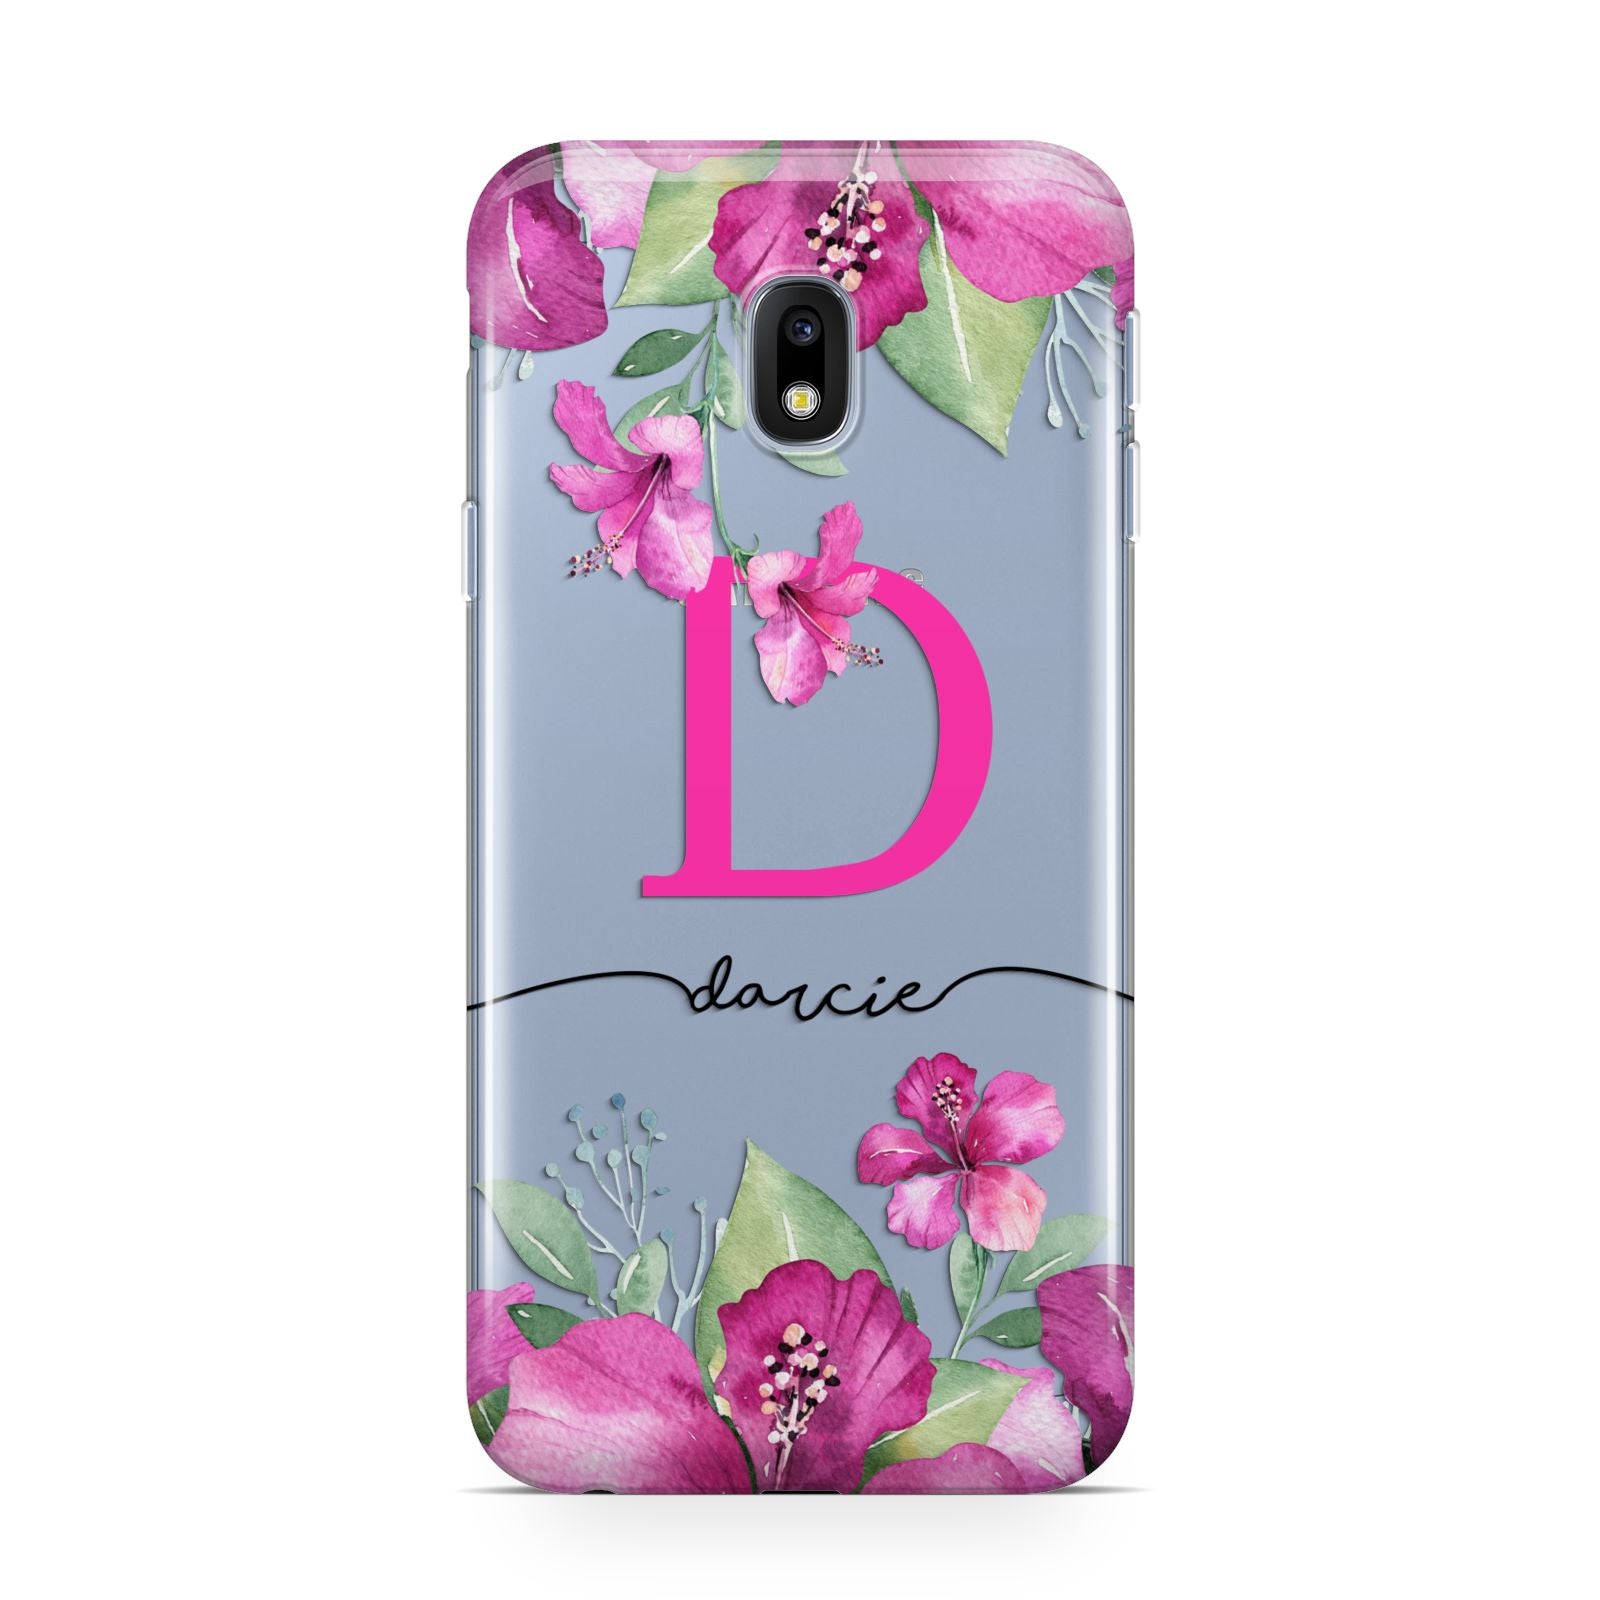 Personalised Pink Lilies Samsung Galaxy J3 2017 Case